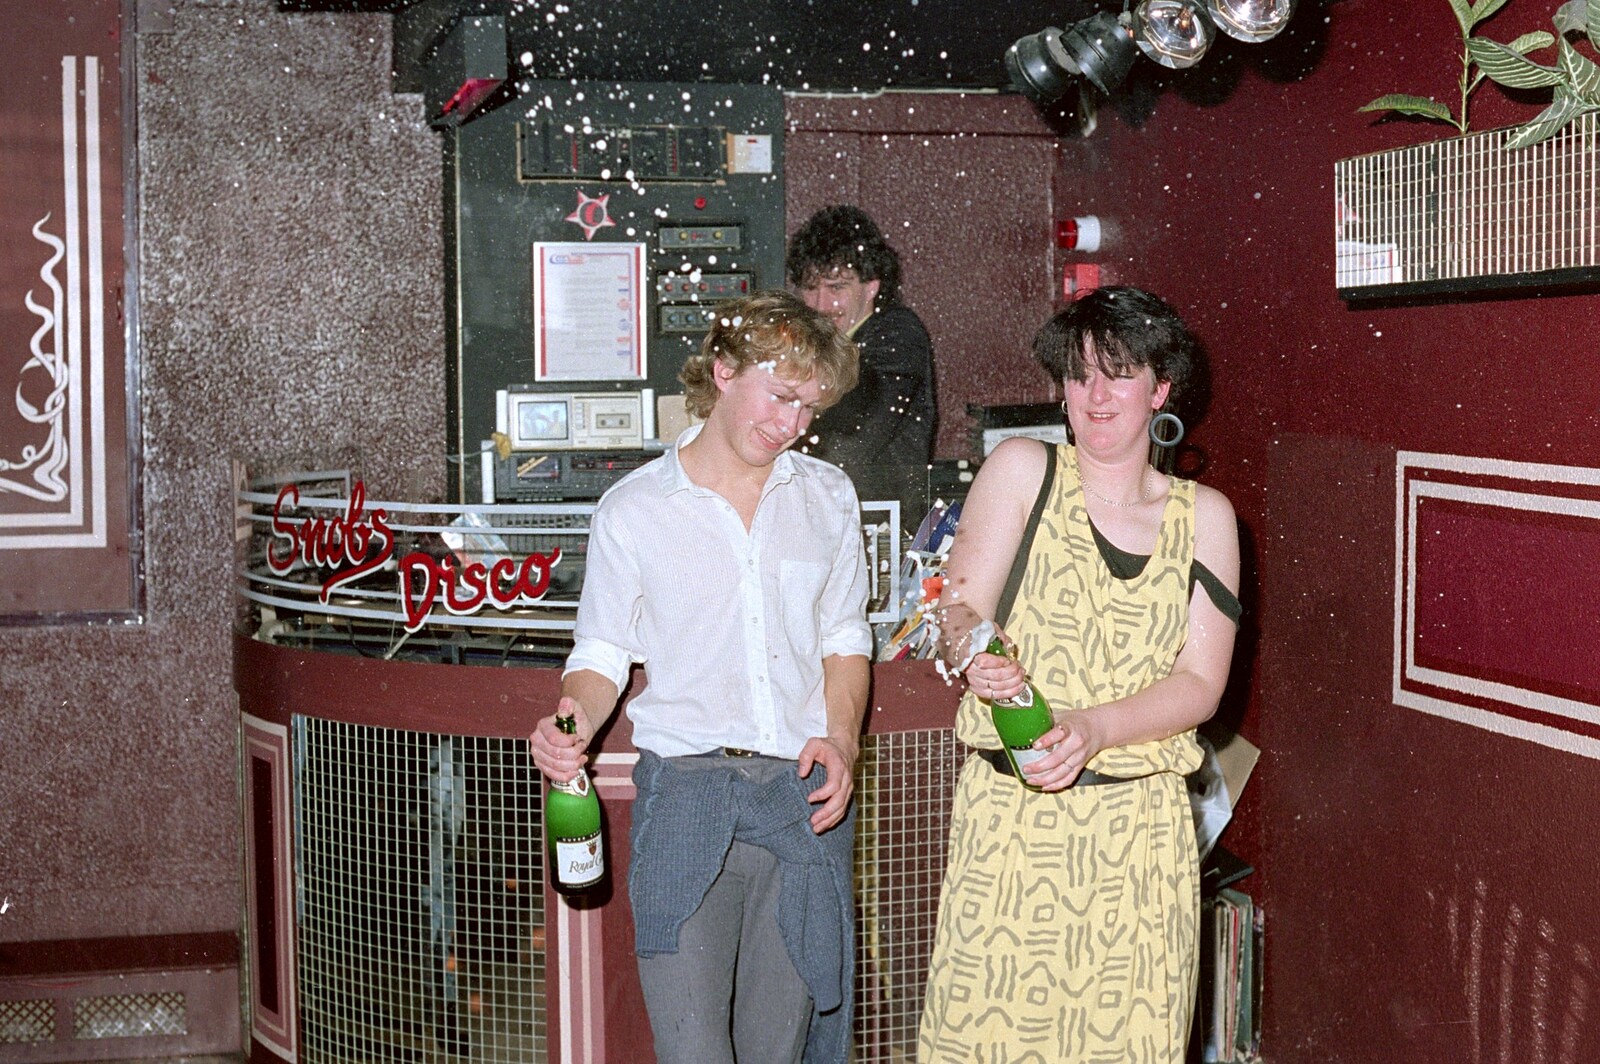 Fake Champagne fizz flies through the air from Uni: A Party in Snobs Nightclub, Mayflower Street, Plymouth - 18th October 1986